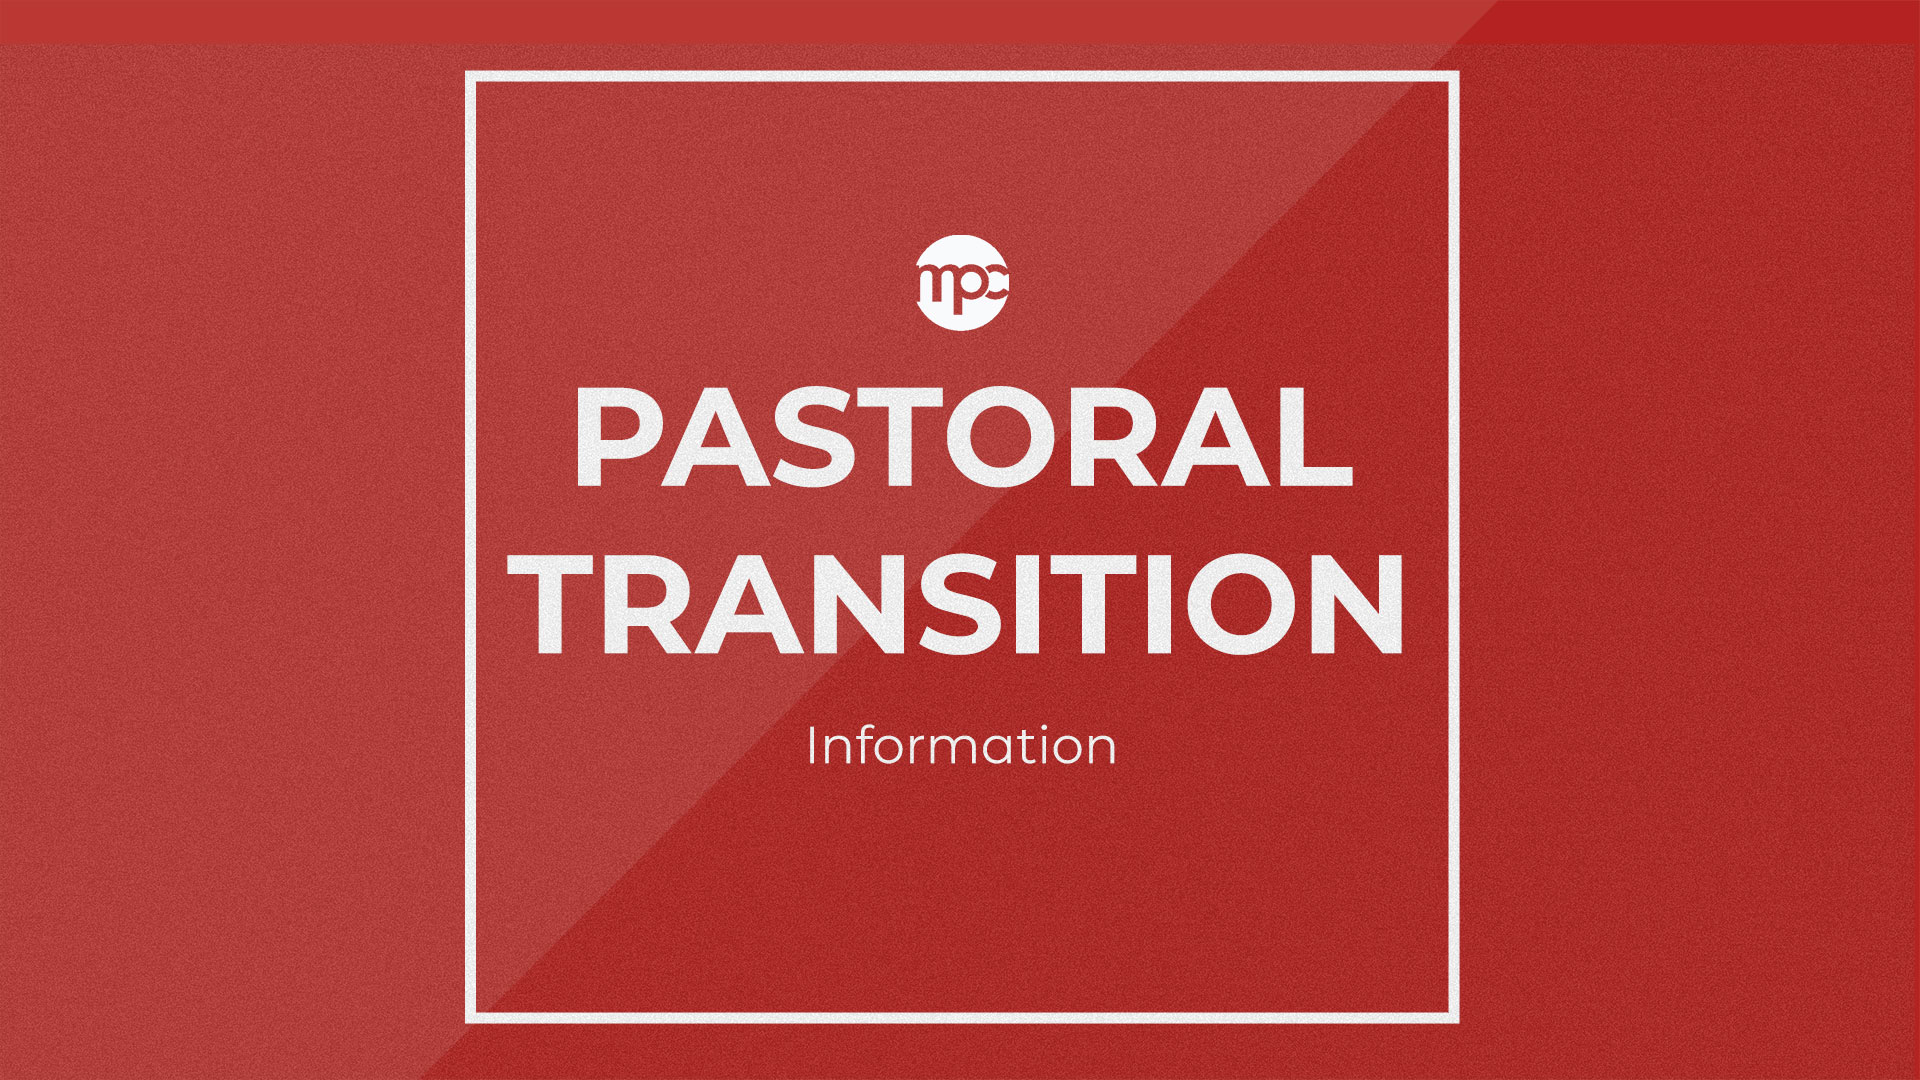 Pastoral Transition

Check out the latest information and updates on our Pastoral Transition for MPC.
